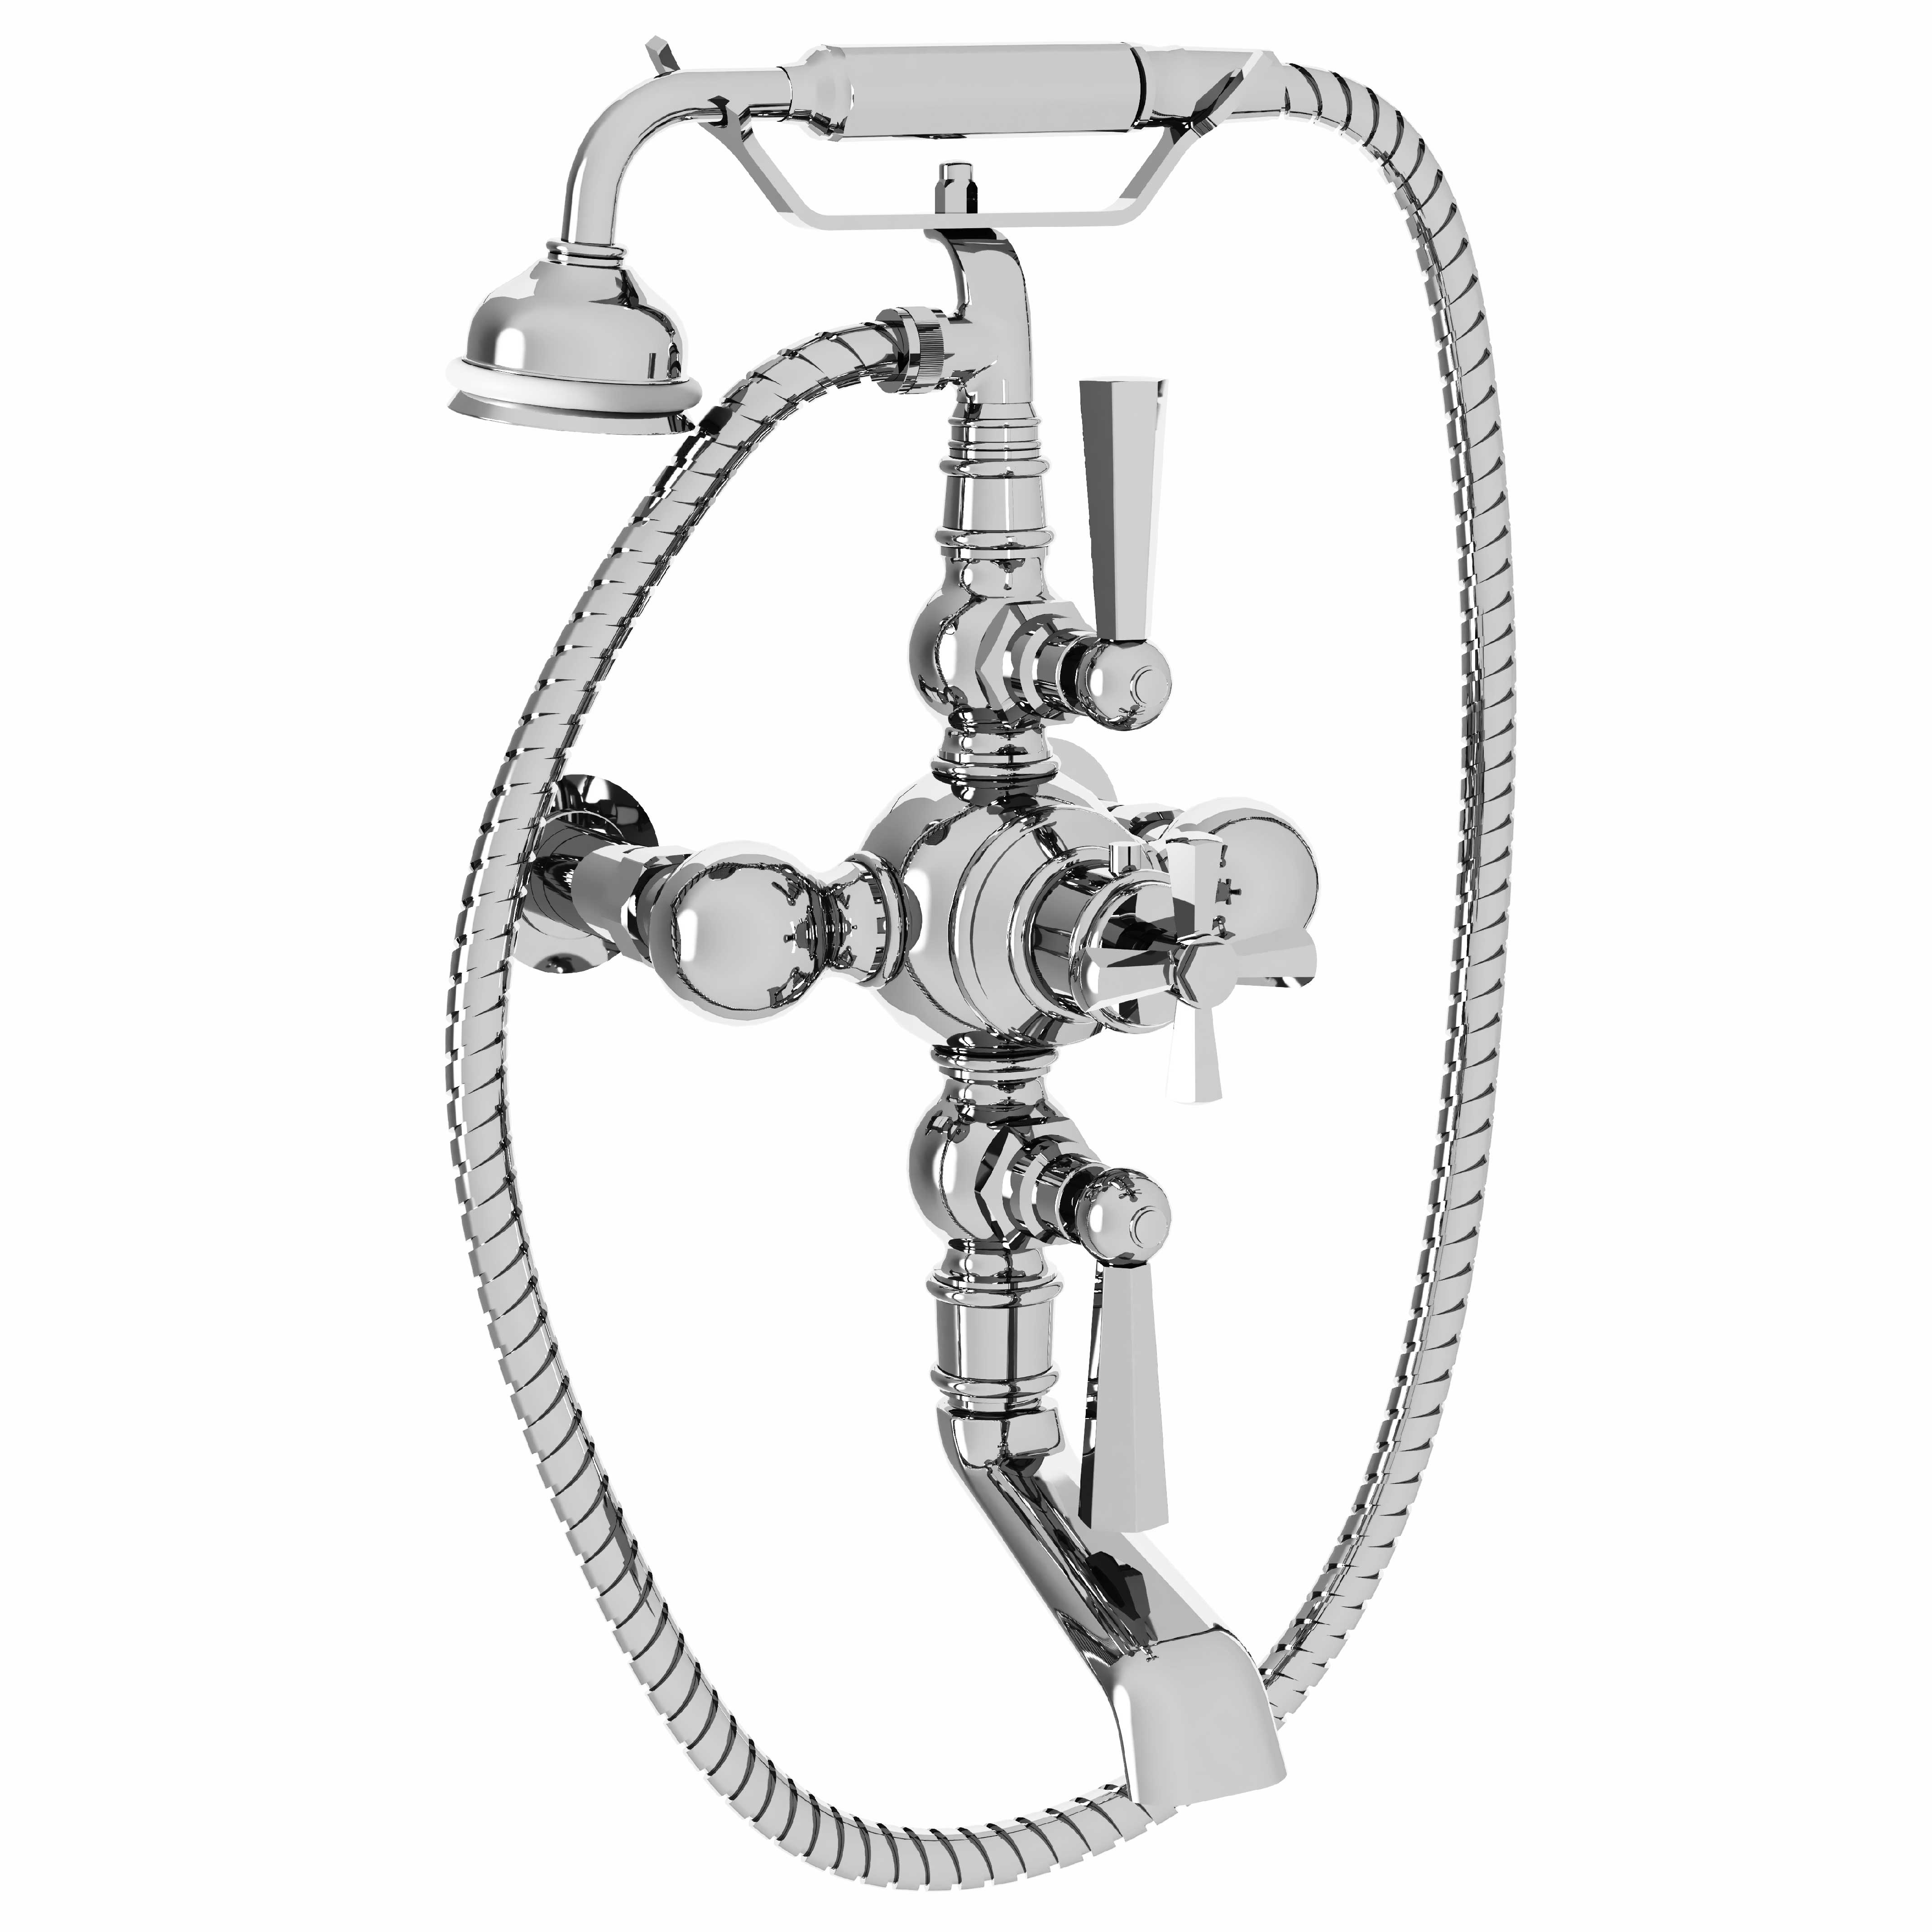 M38-3201T Wall mounted thermo. bath and shower mixer